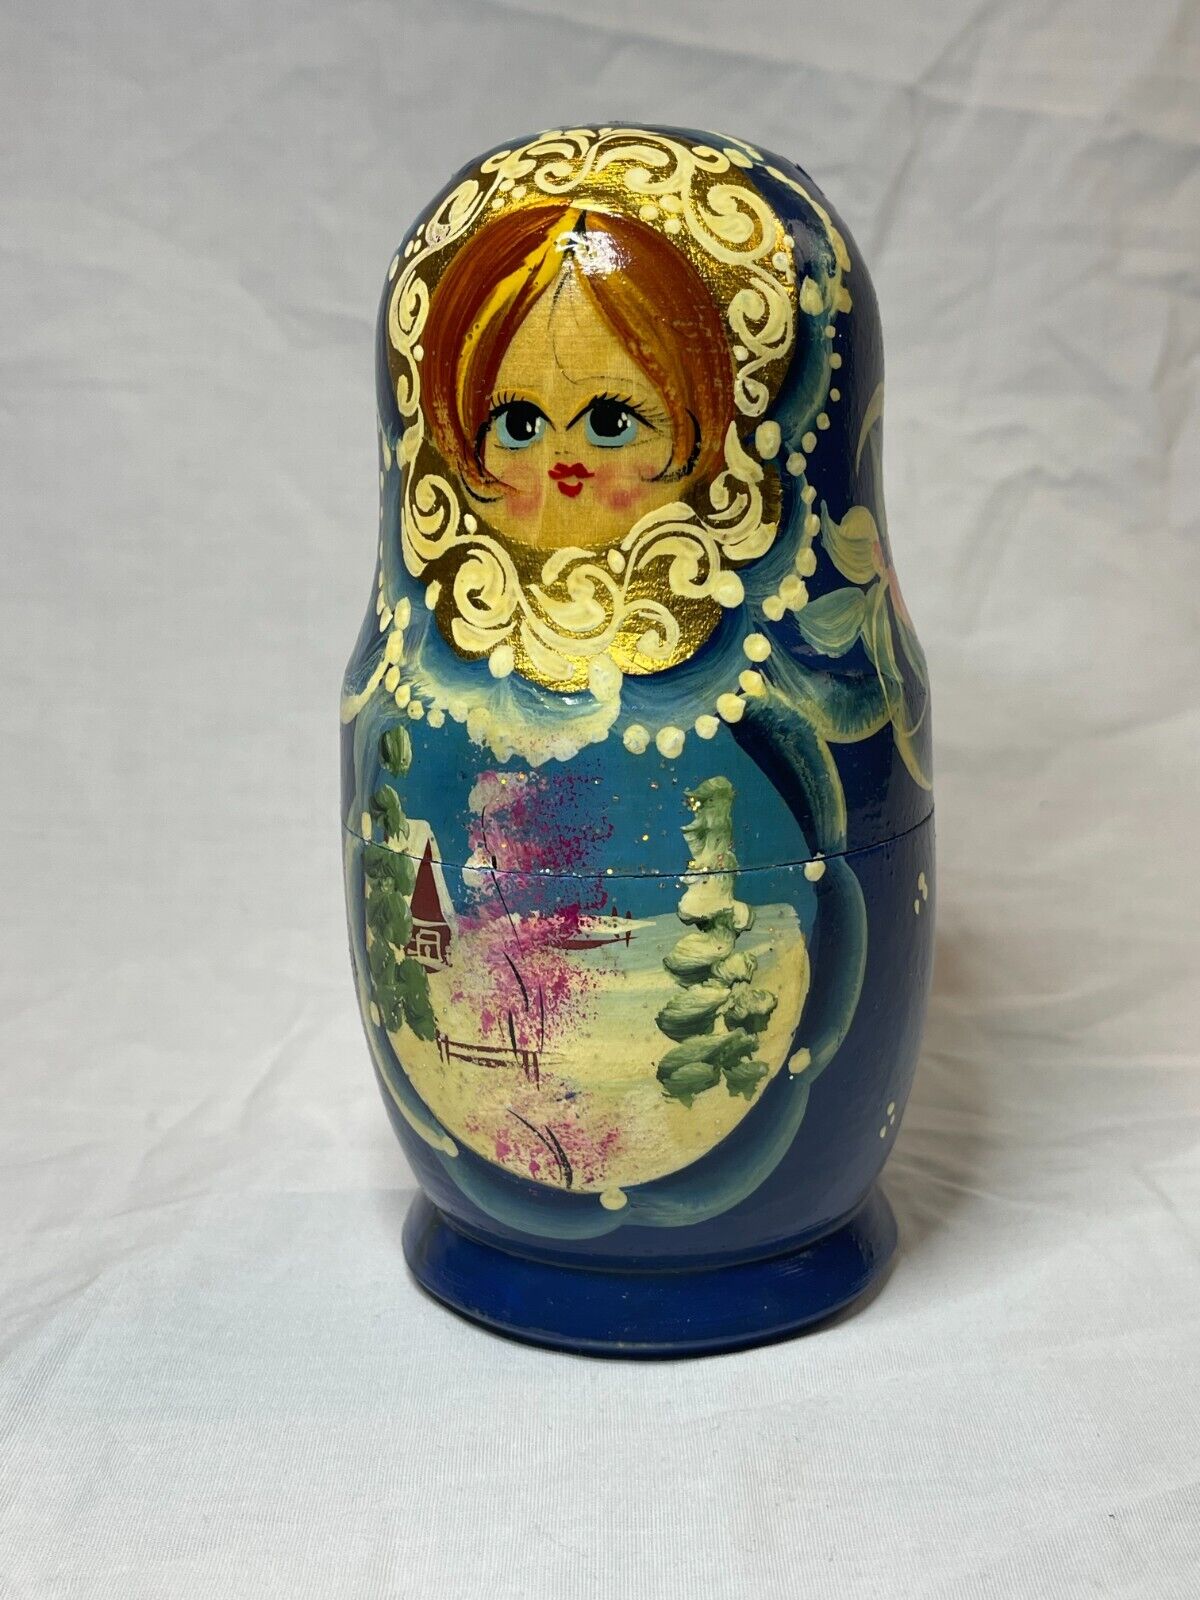 Vintage Russian Nesting Dolls, Set Of 5 Dolls, Beautiful hand painted - unsigned